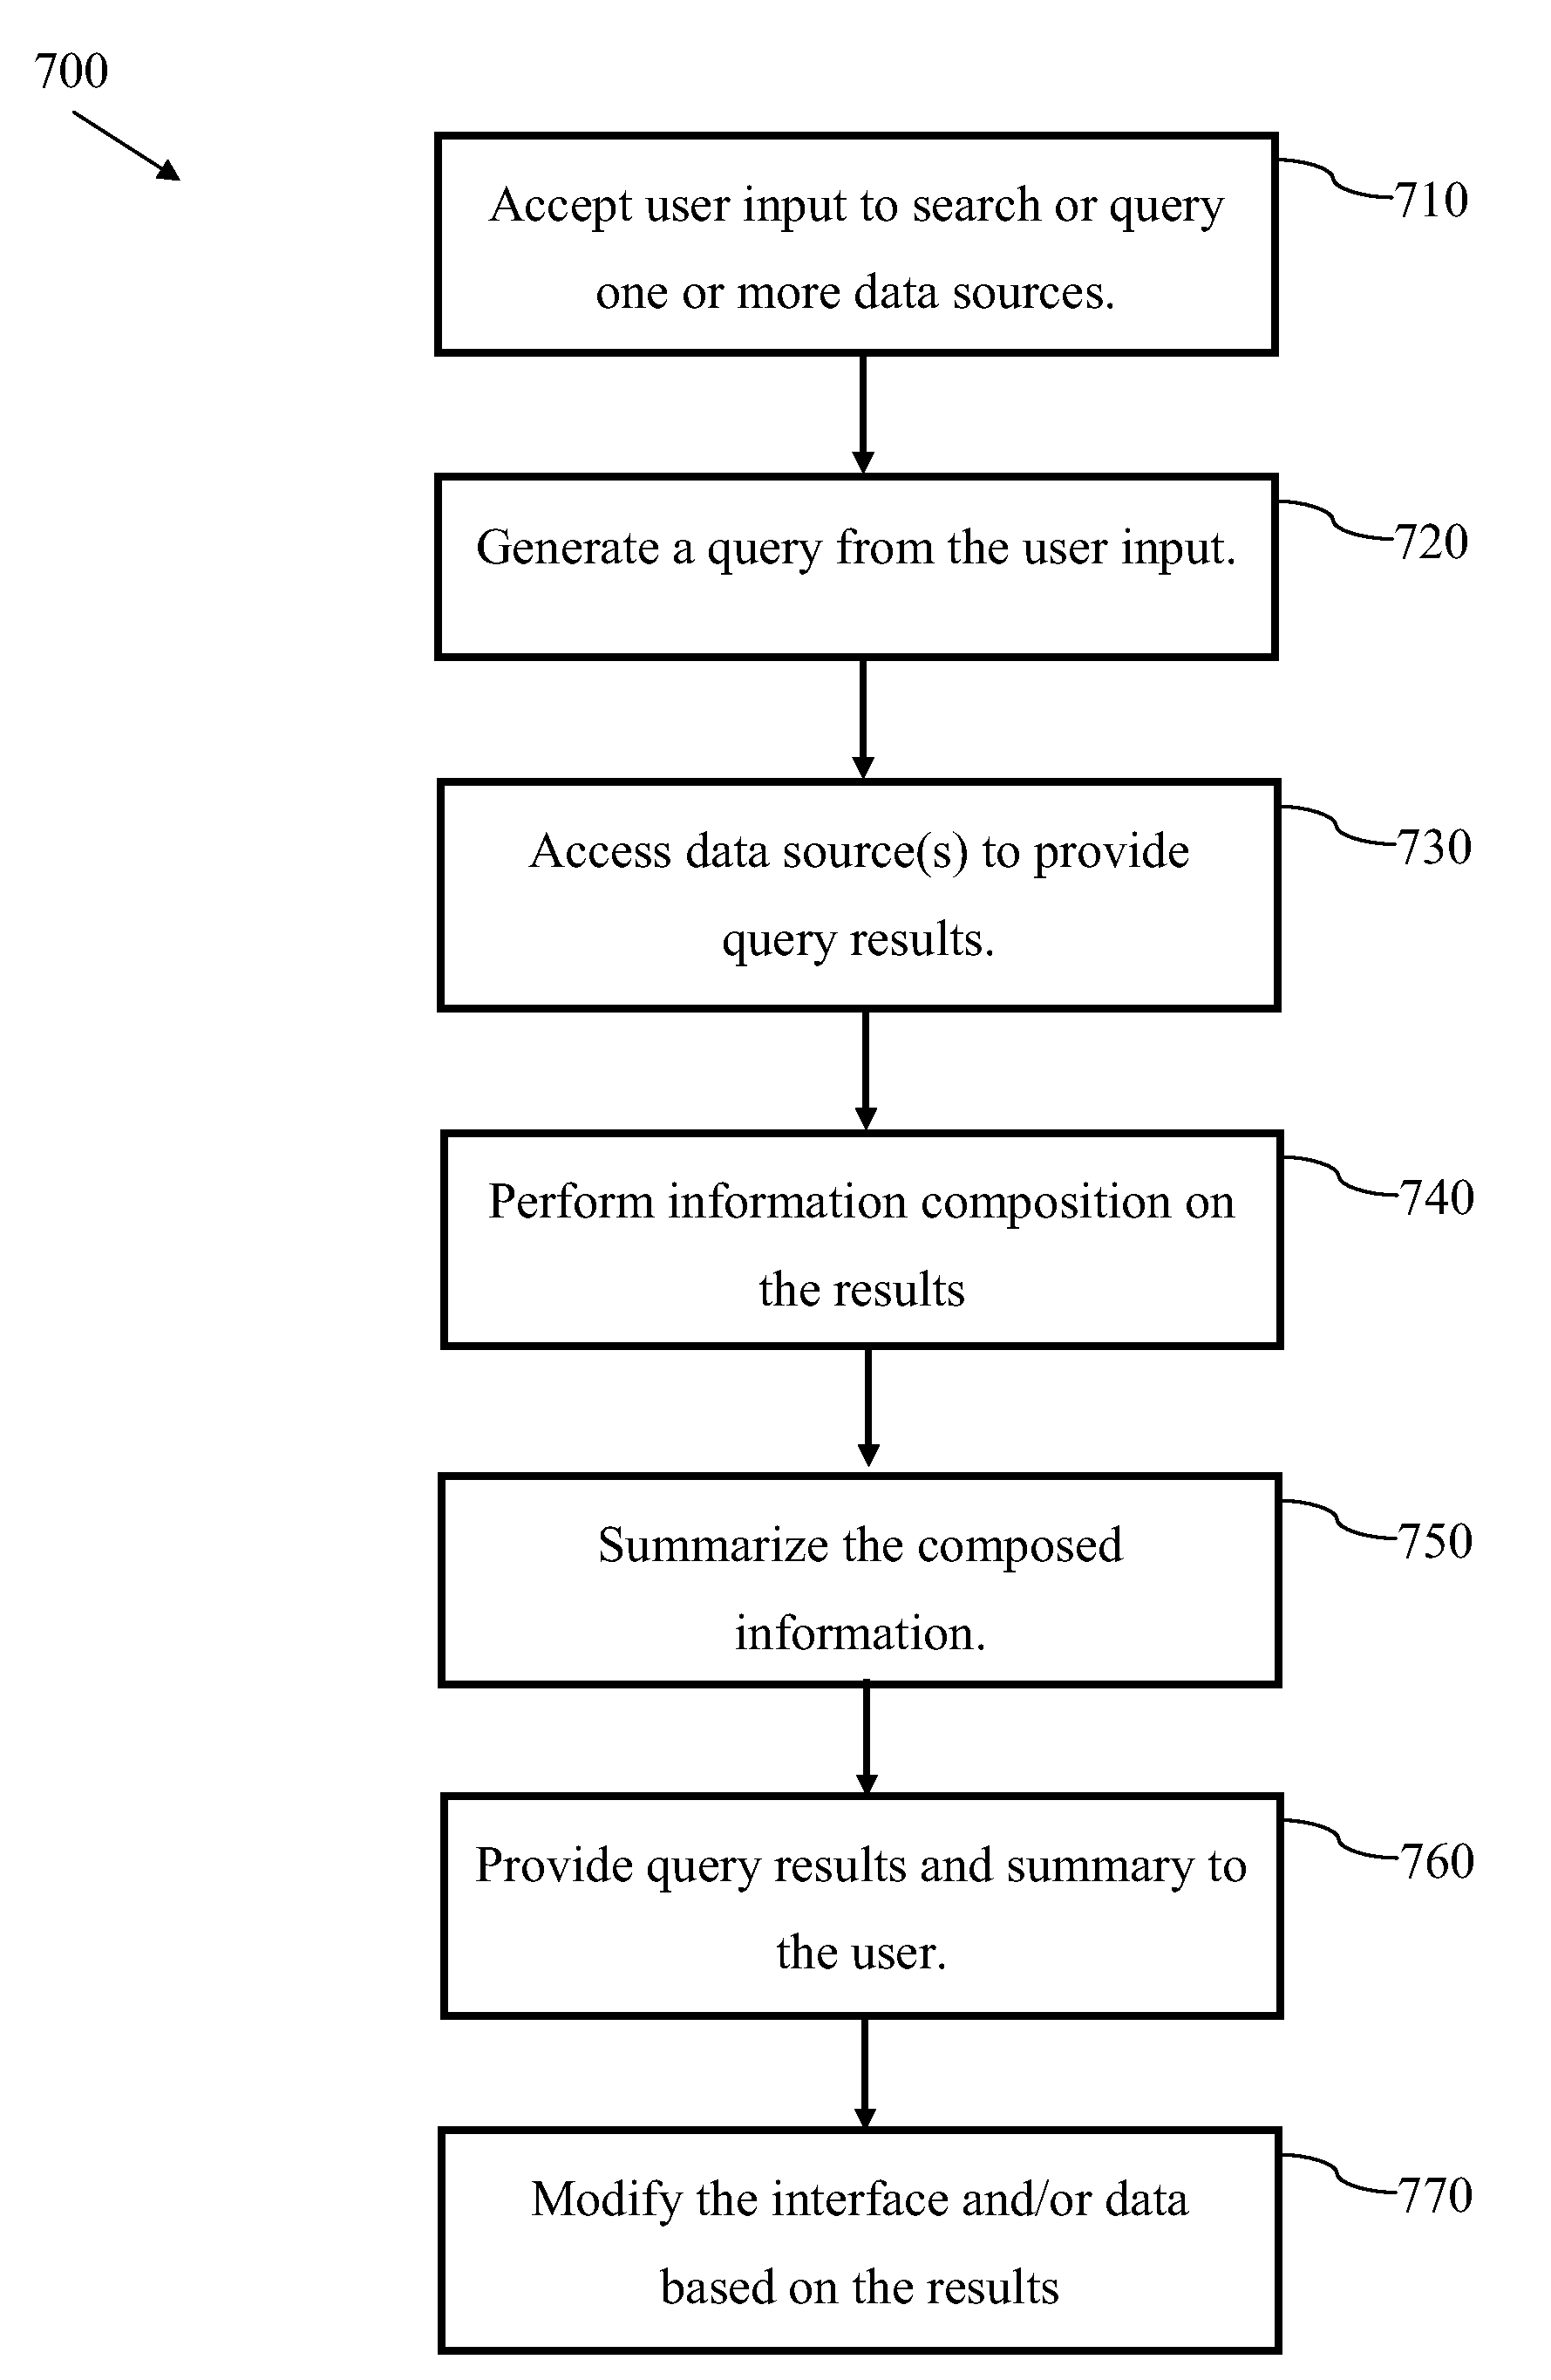 Automated healthcare information composition and query enhancement